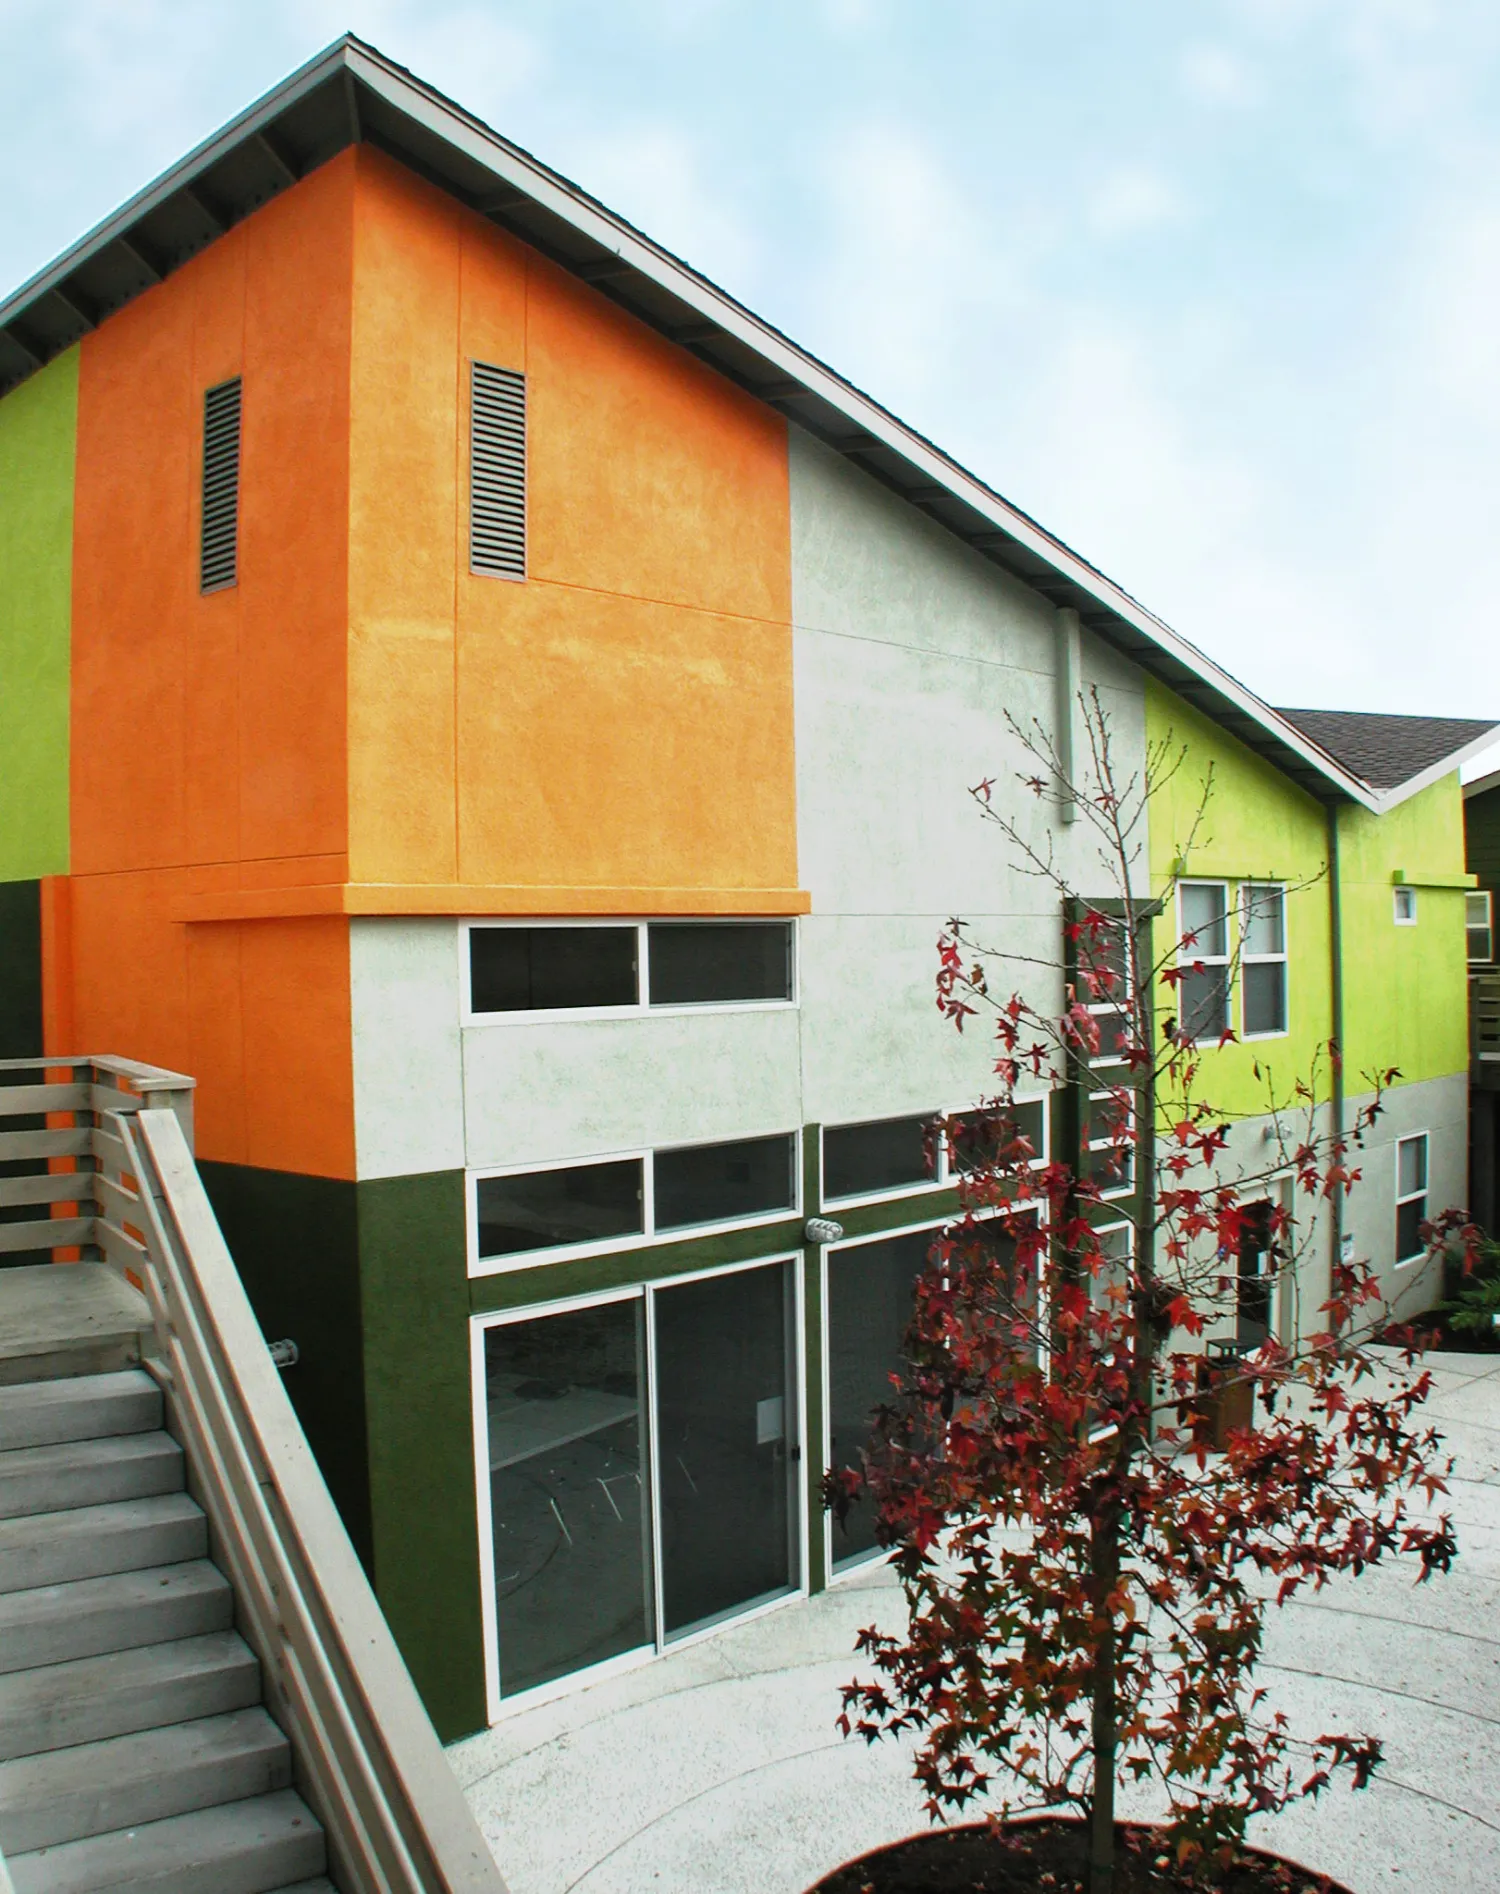 Exterior view of the colorful community building at Stoney Pine Villa in Sunnyvale, California.